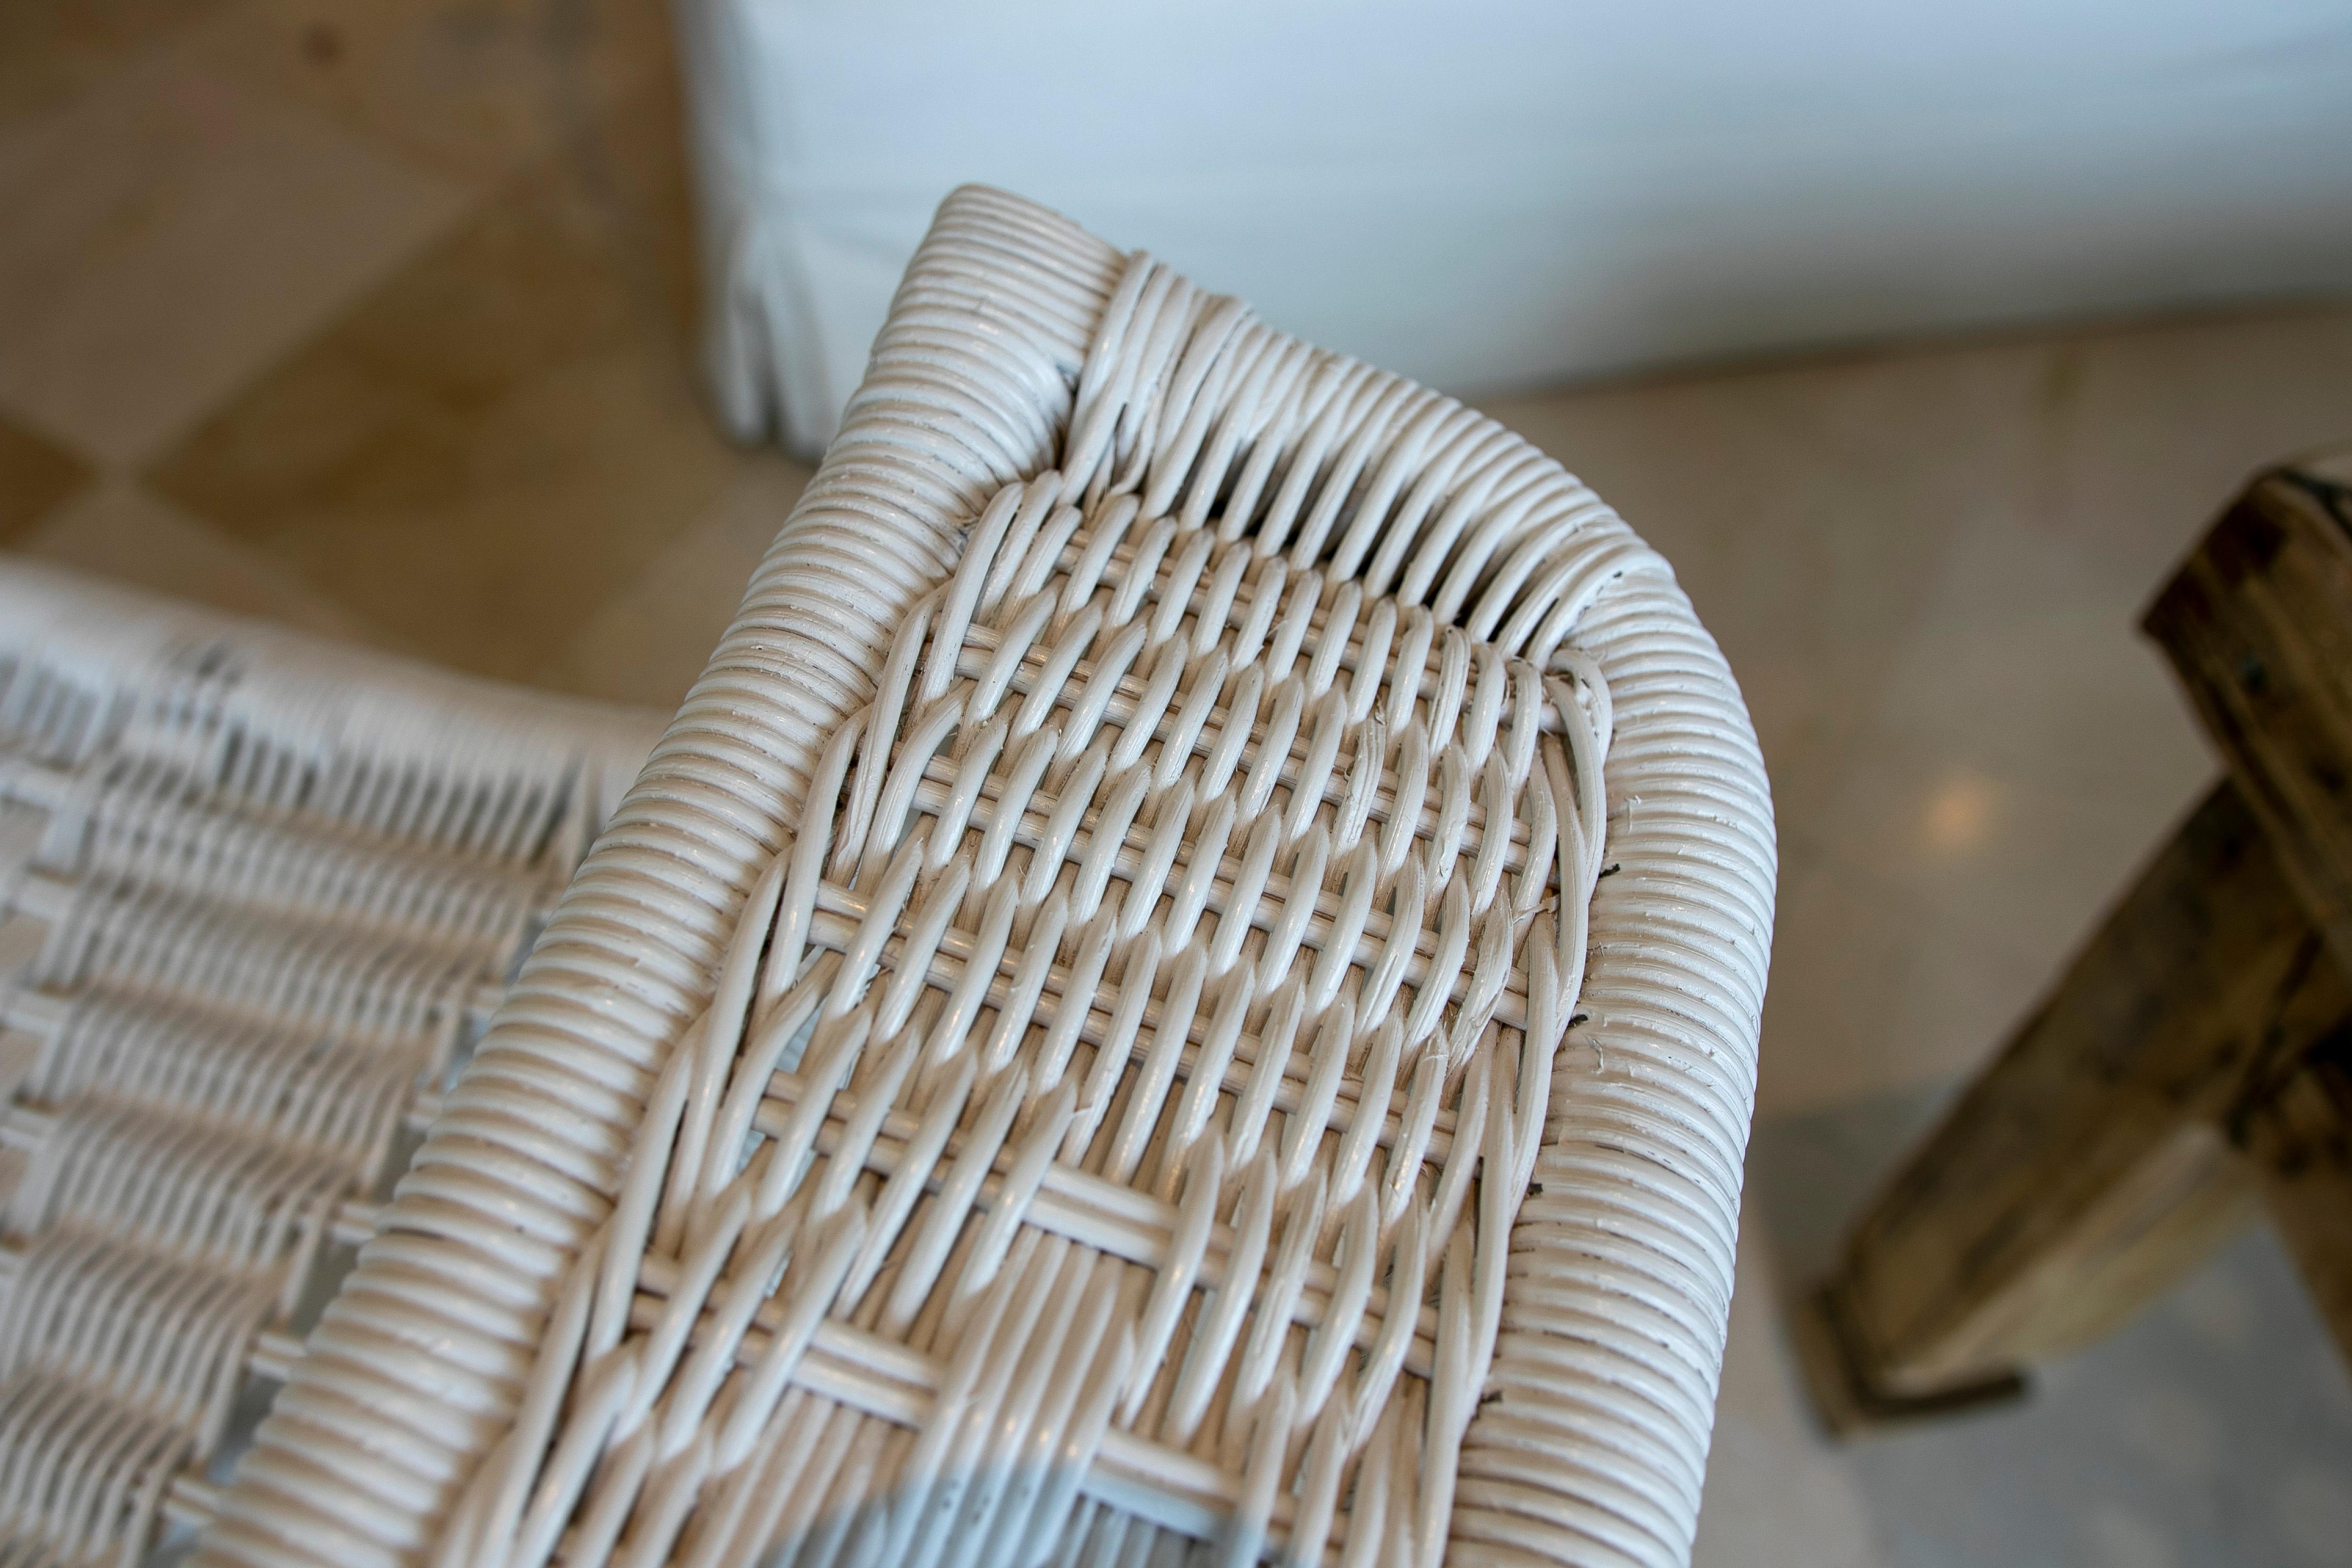 Spanish Handmade Wicker Stool Lacquered in White Colour For Sale 2